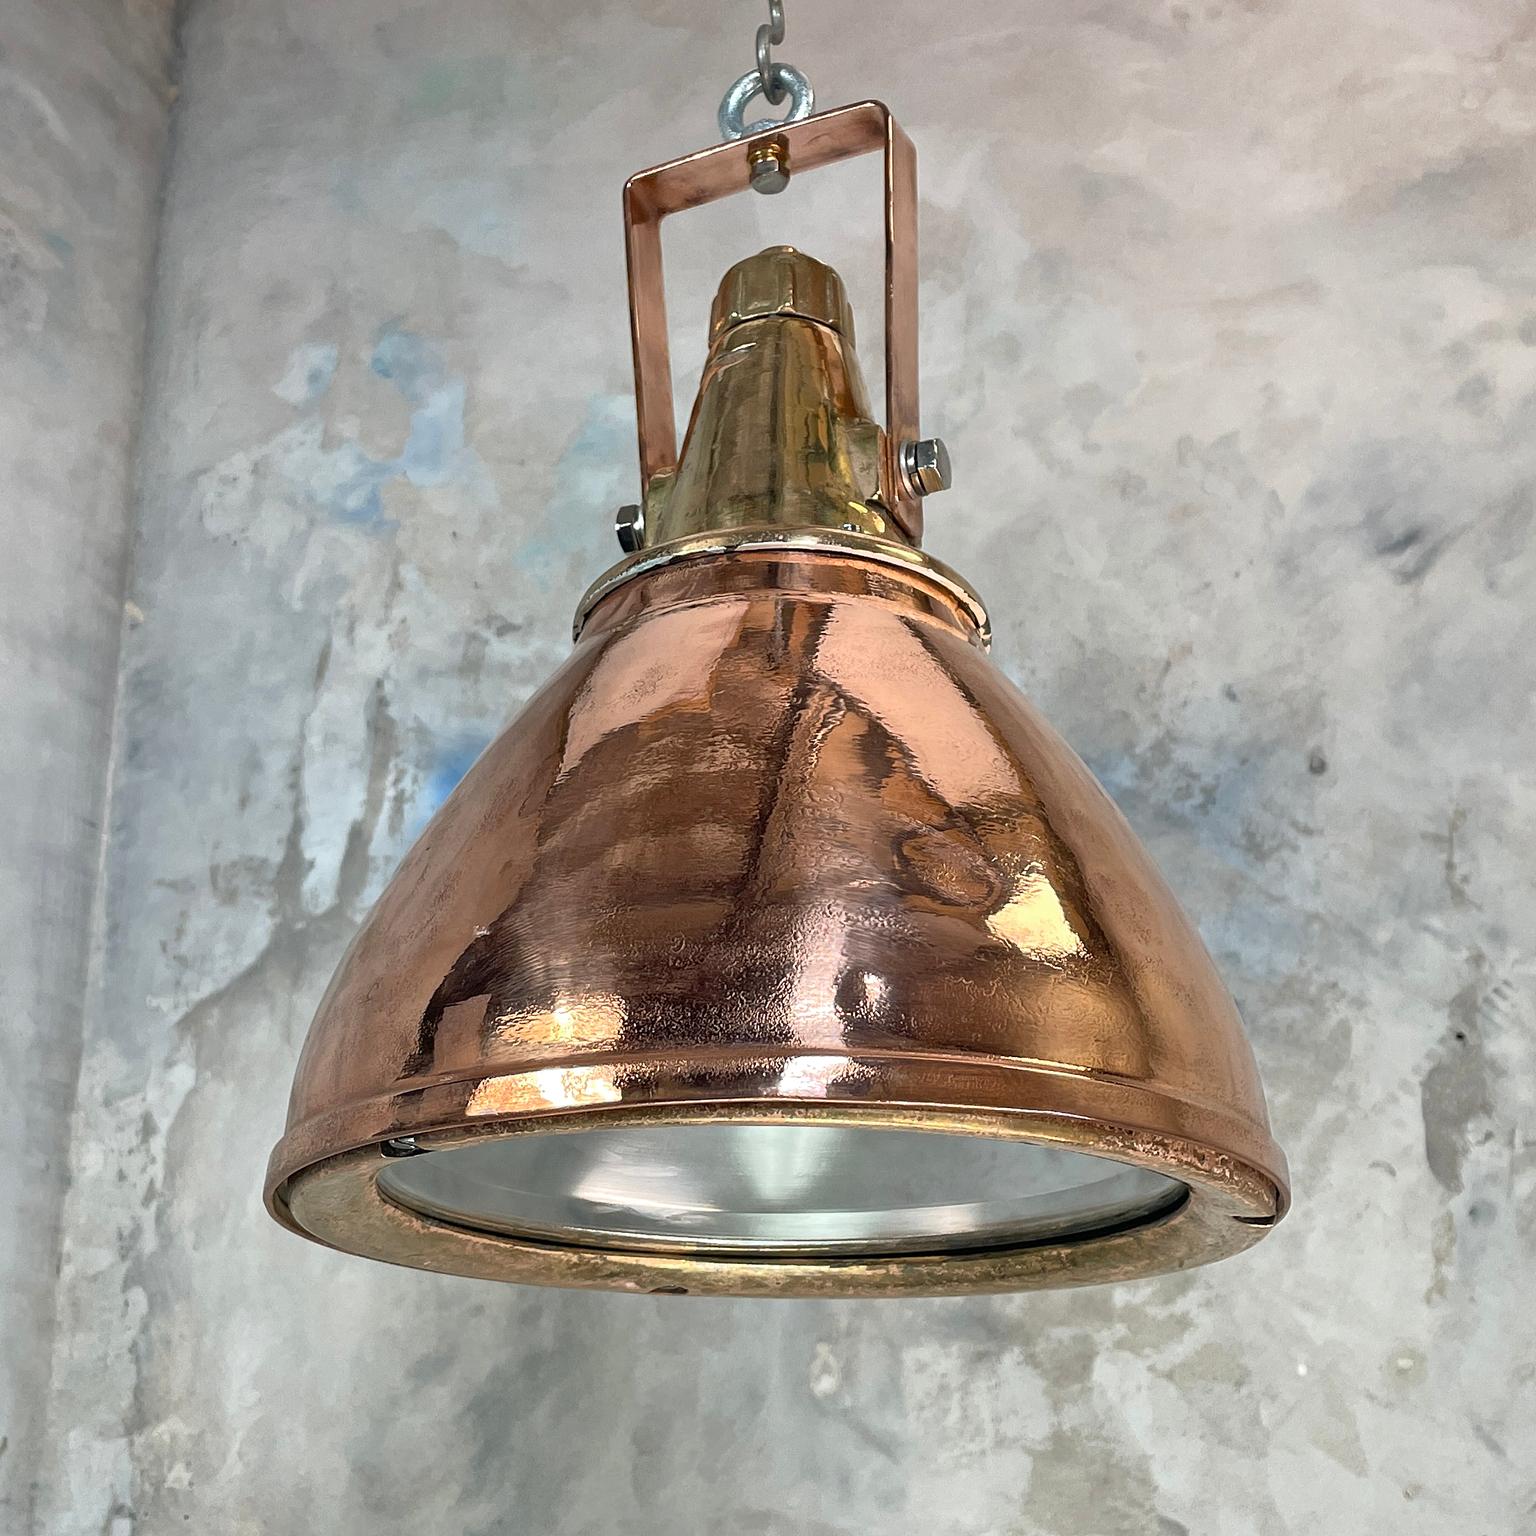 1970s German Copper & Brass Industrial Ceiling Pendant Light with Beam Focus 2